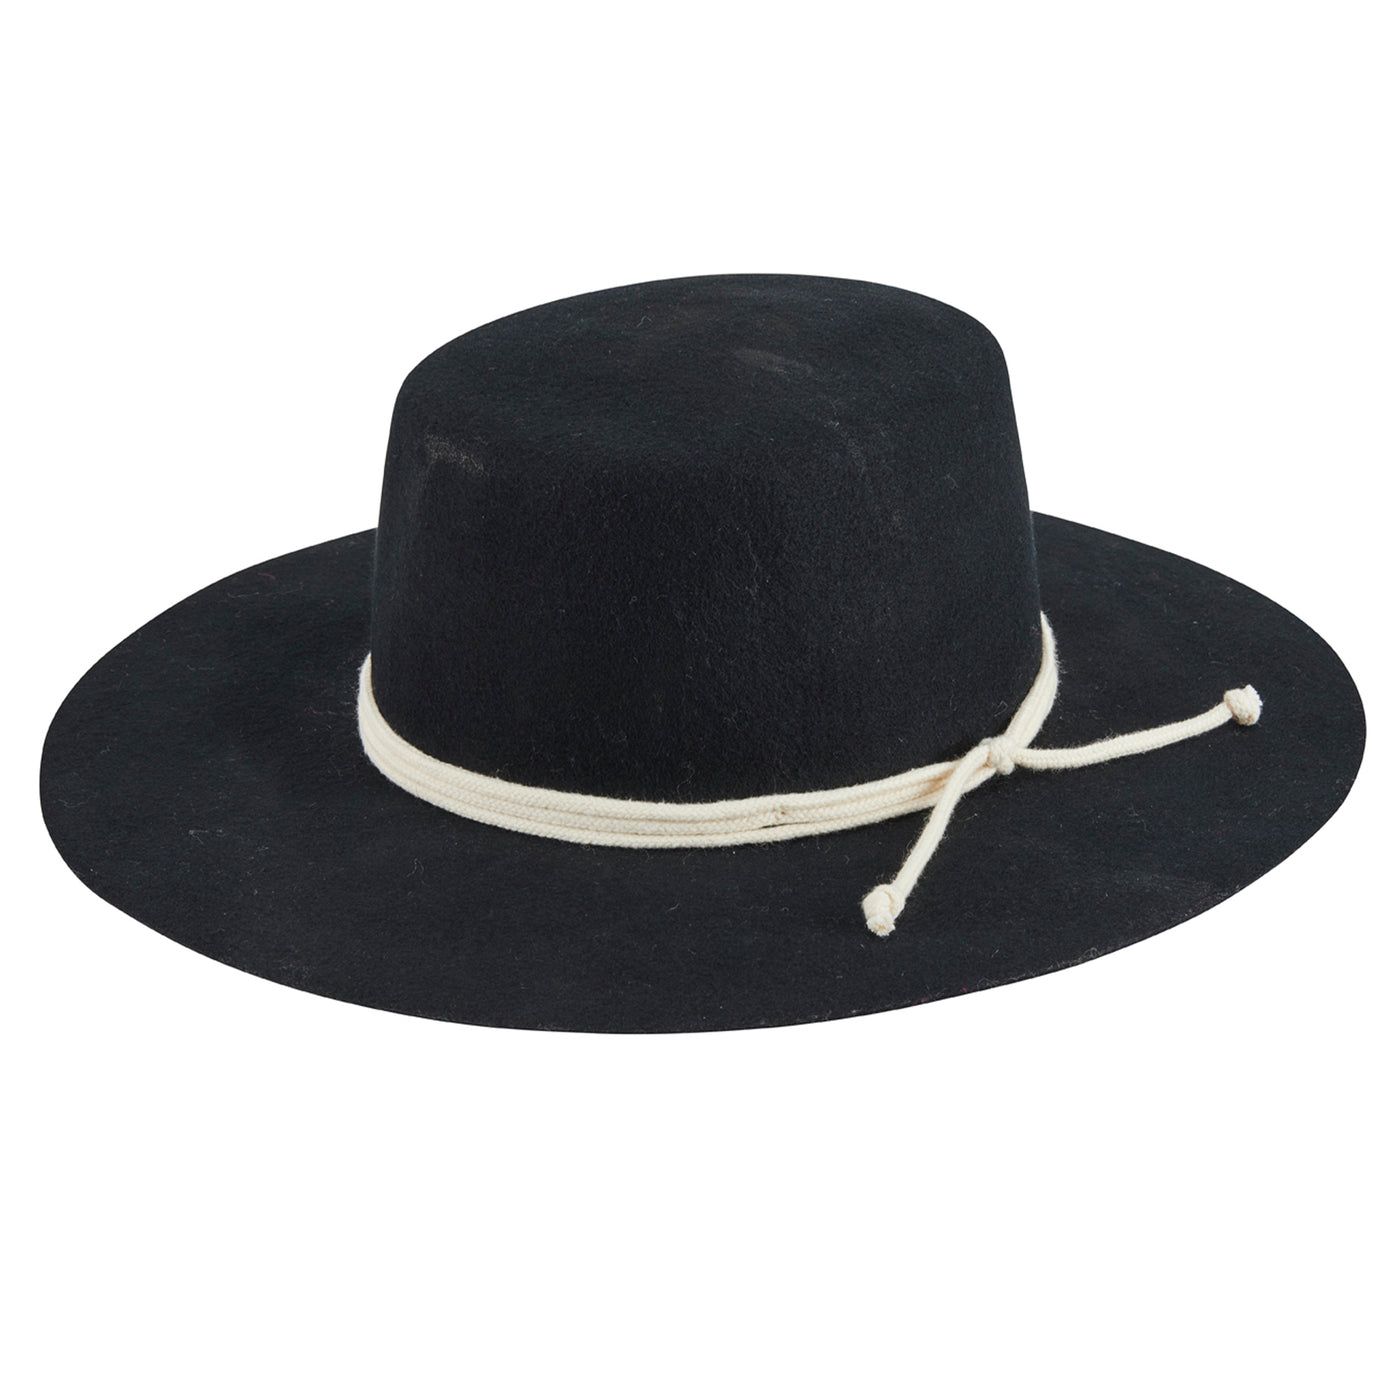 BOATER - Women's Wool Felt Wide Brim Boater With Triple Wrapped Rope Trim